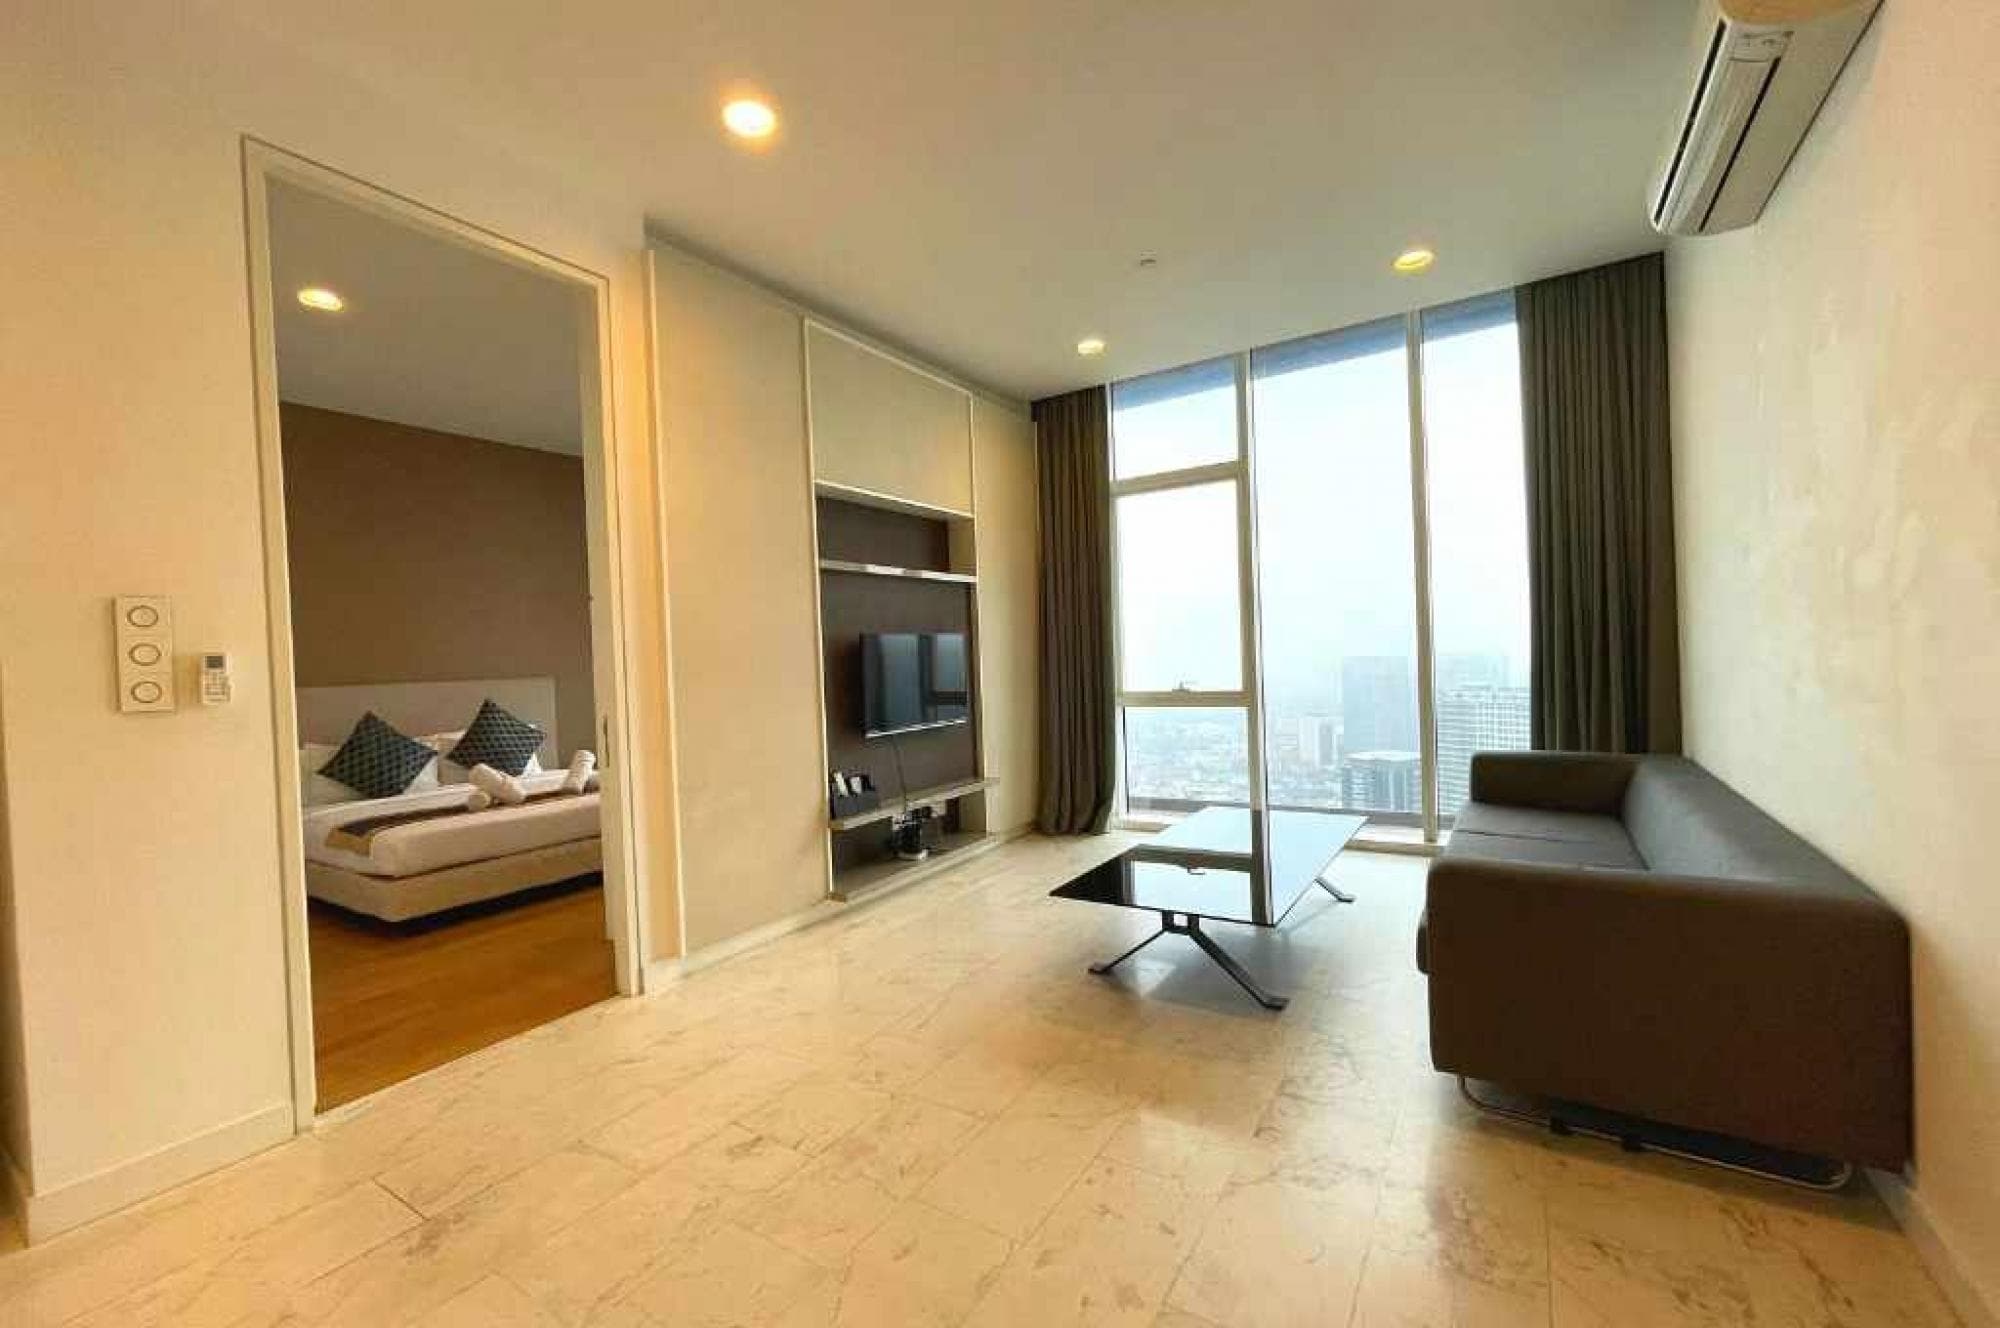 Property Image 1 - Homely Tranquil 1 Bedroom Apartment in Kuala Lumpur  